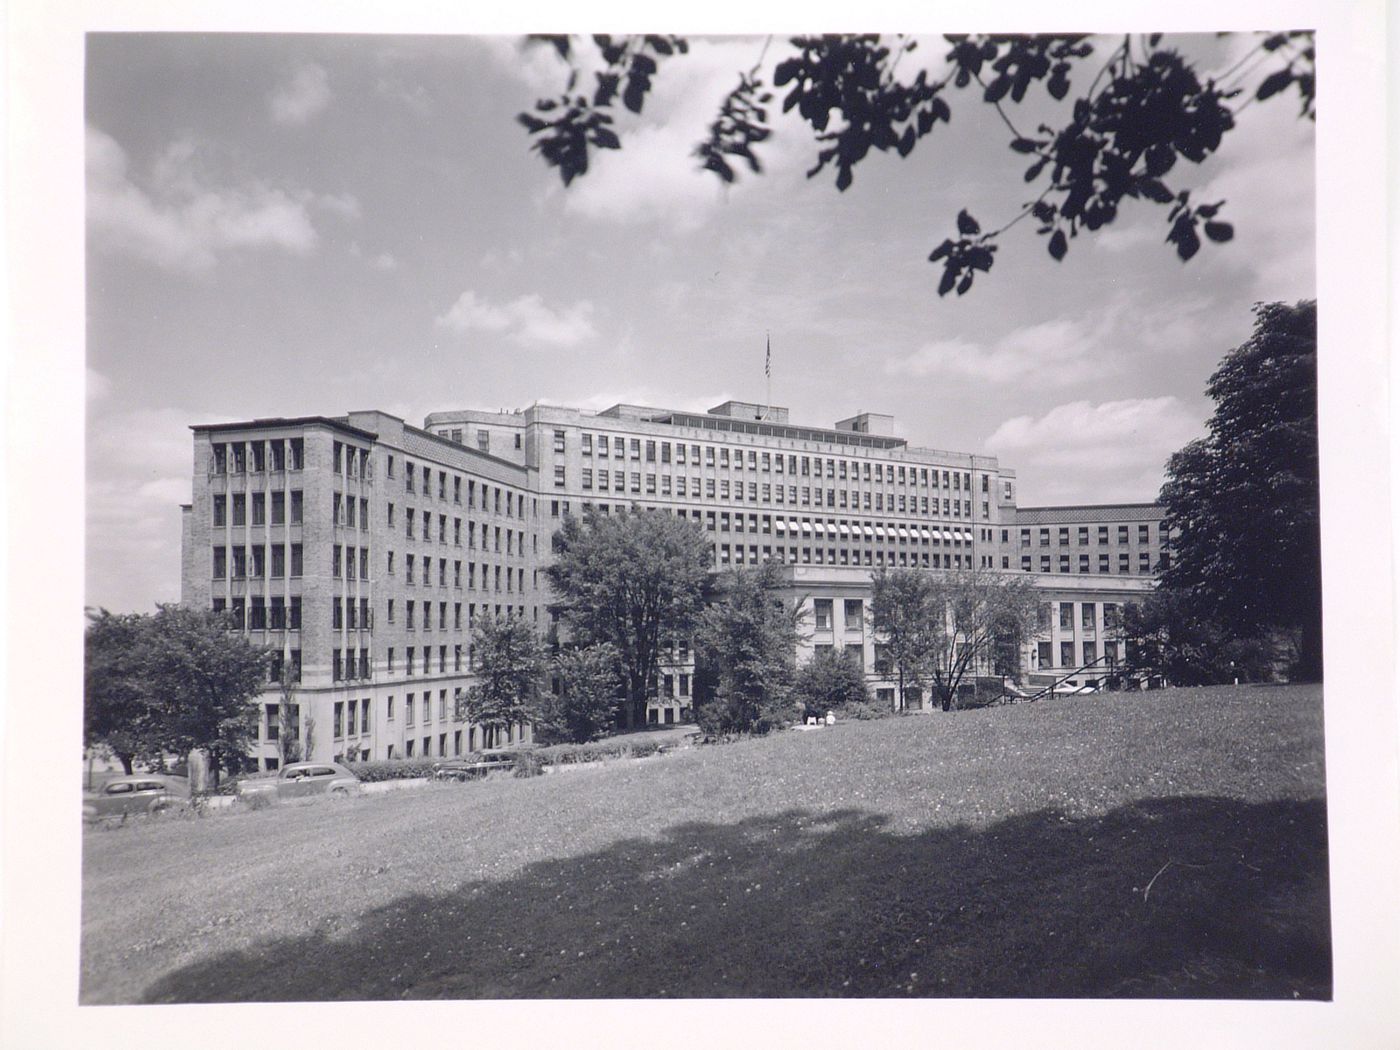 View of the University Hospital (now the University of Michigan Health System) showing the Administration Building and the Main Ward Building, 1500 East Medical Center Drive, University of Michigan, Ann Arbor, Michigan